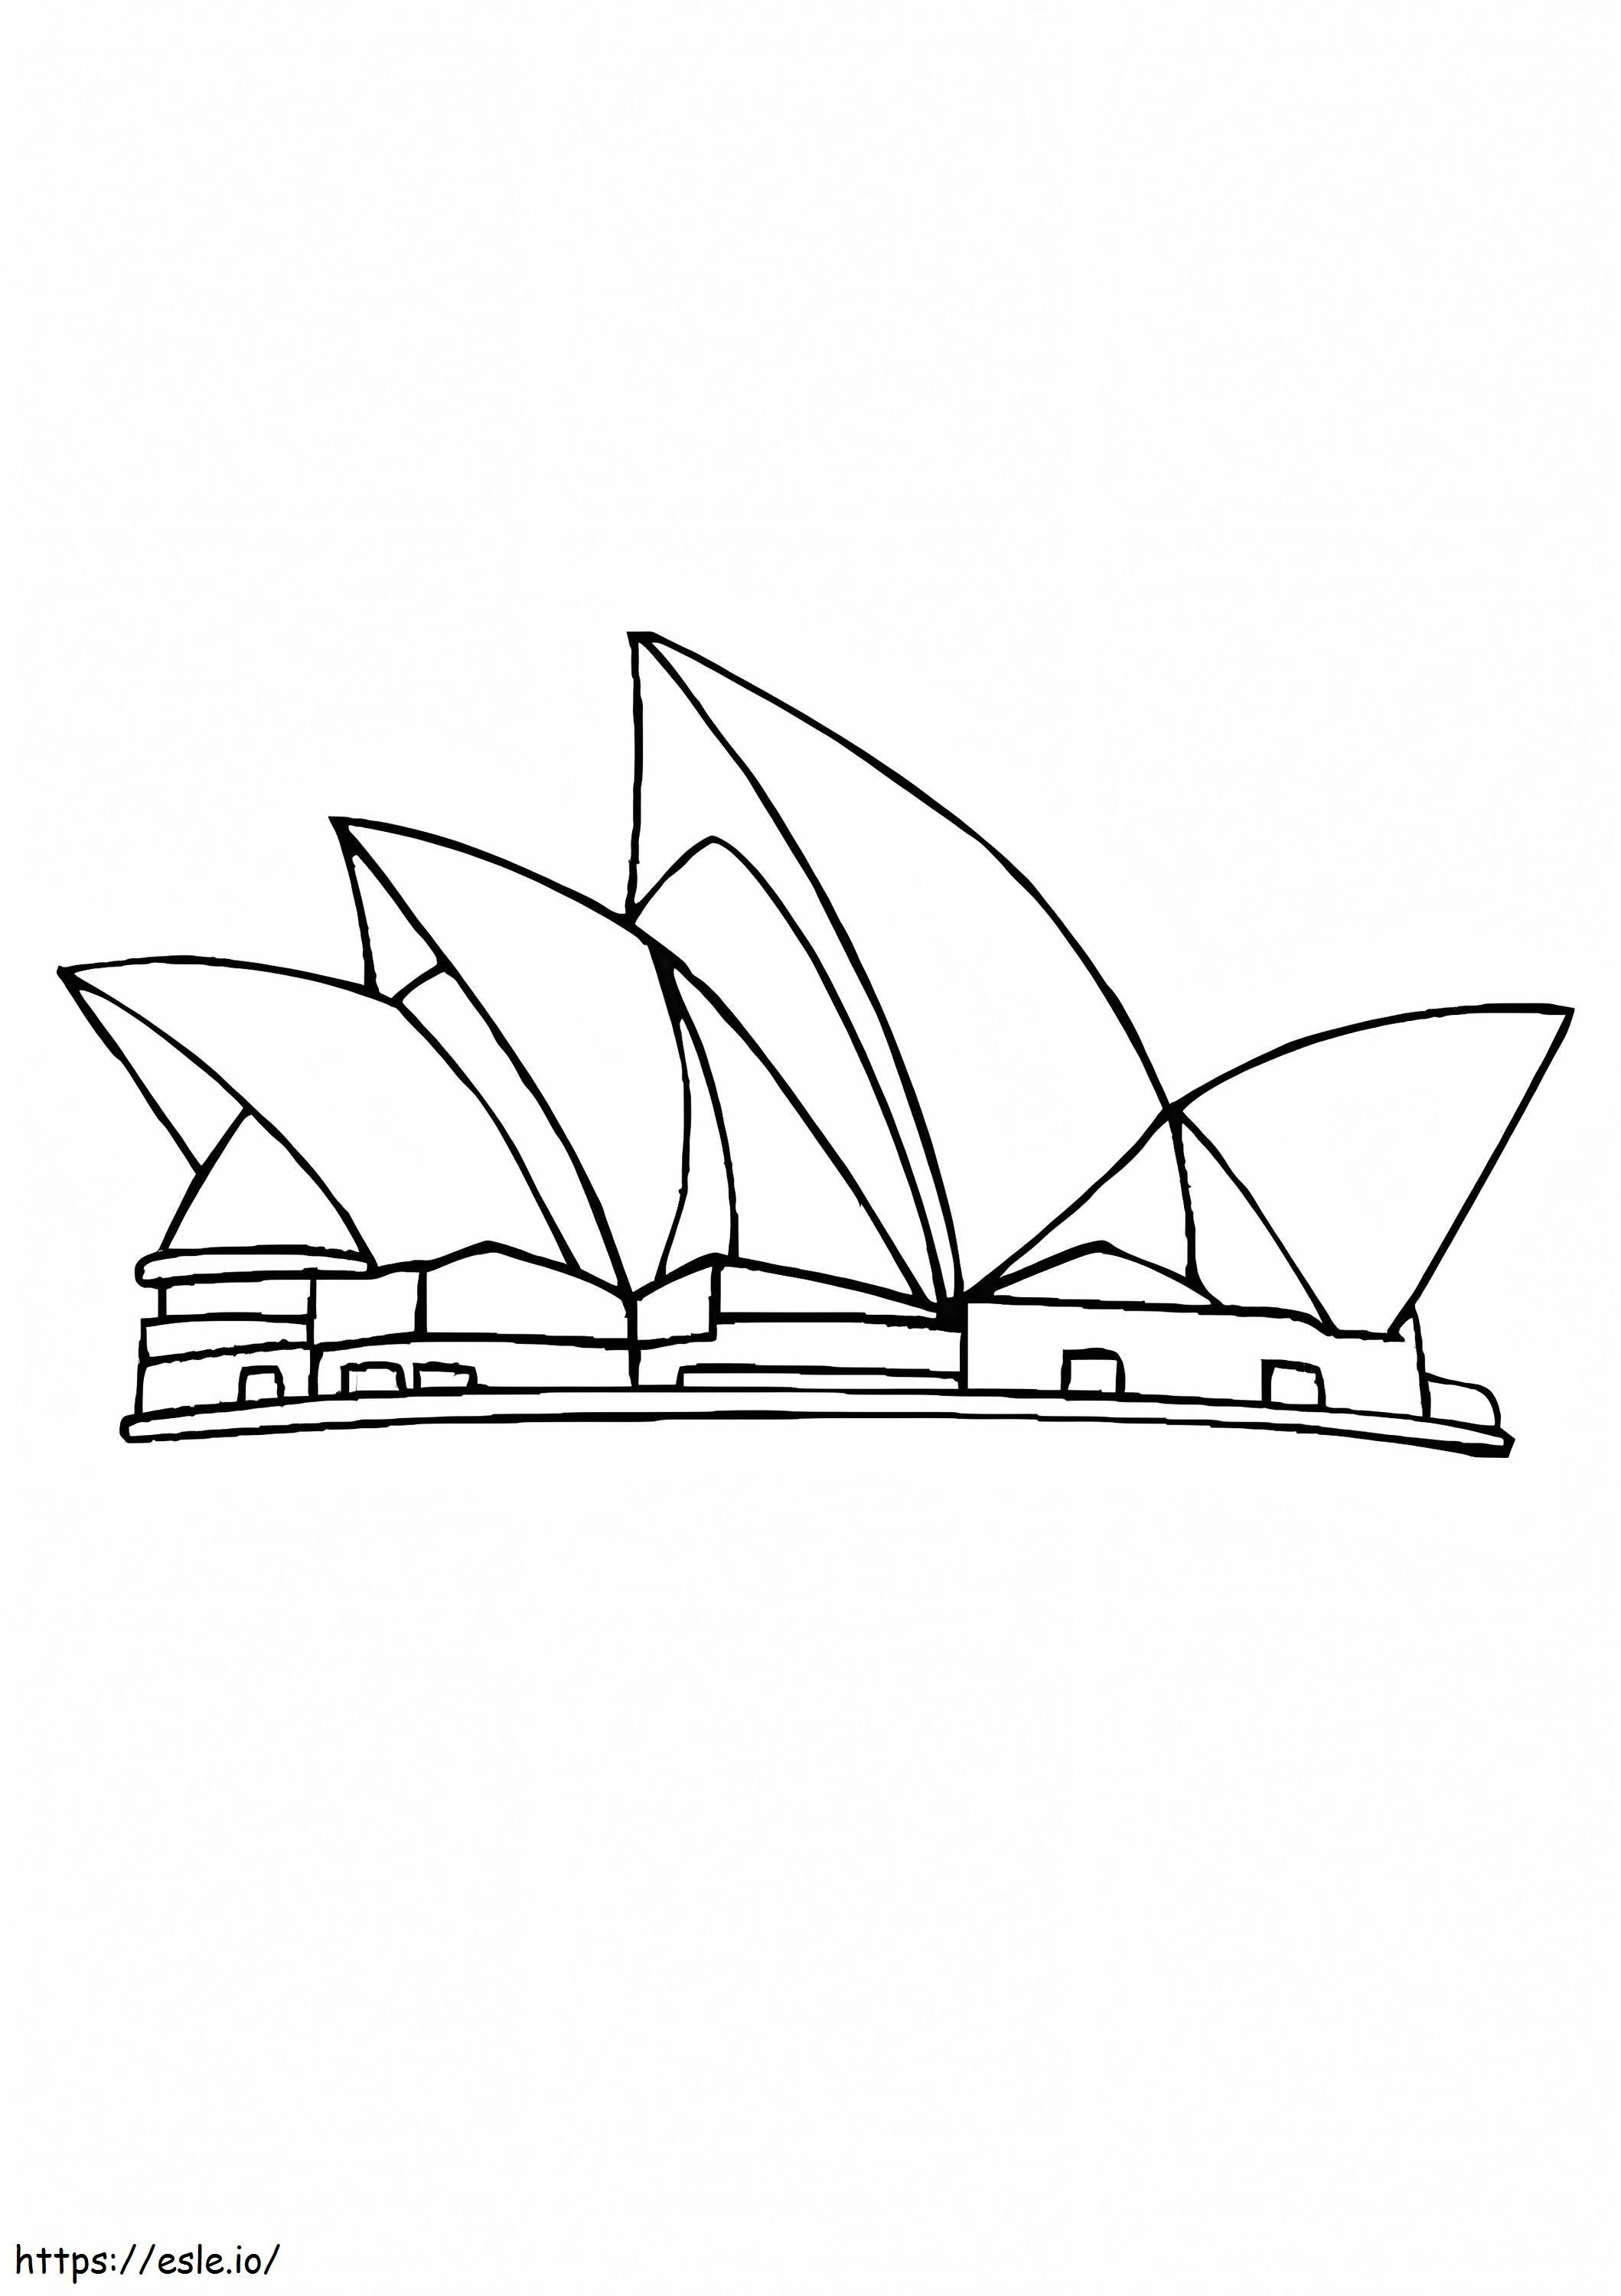 Sydney Opera House 3 coloring page